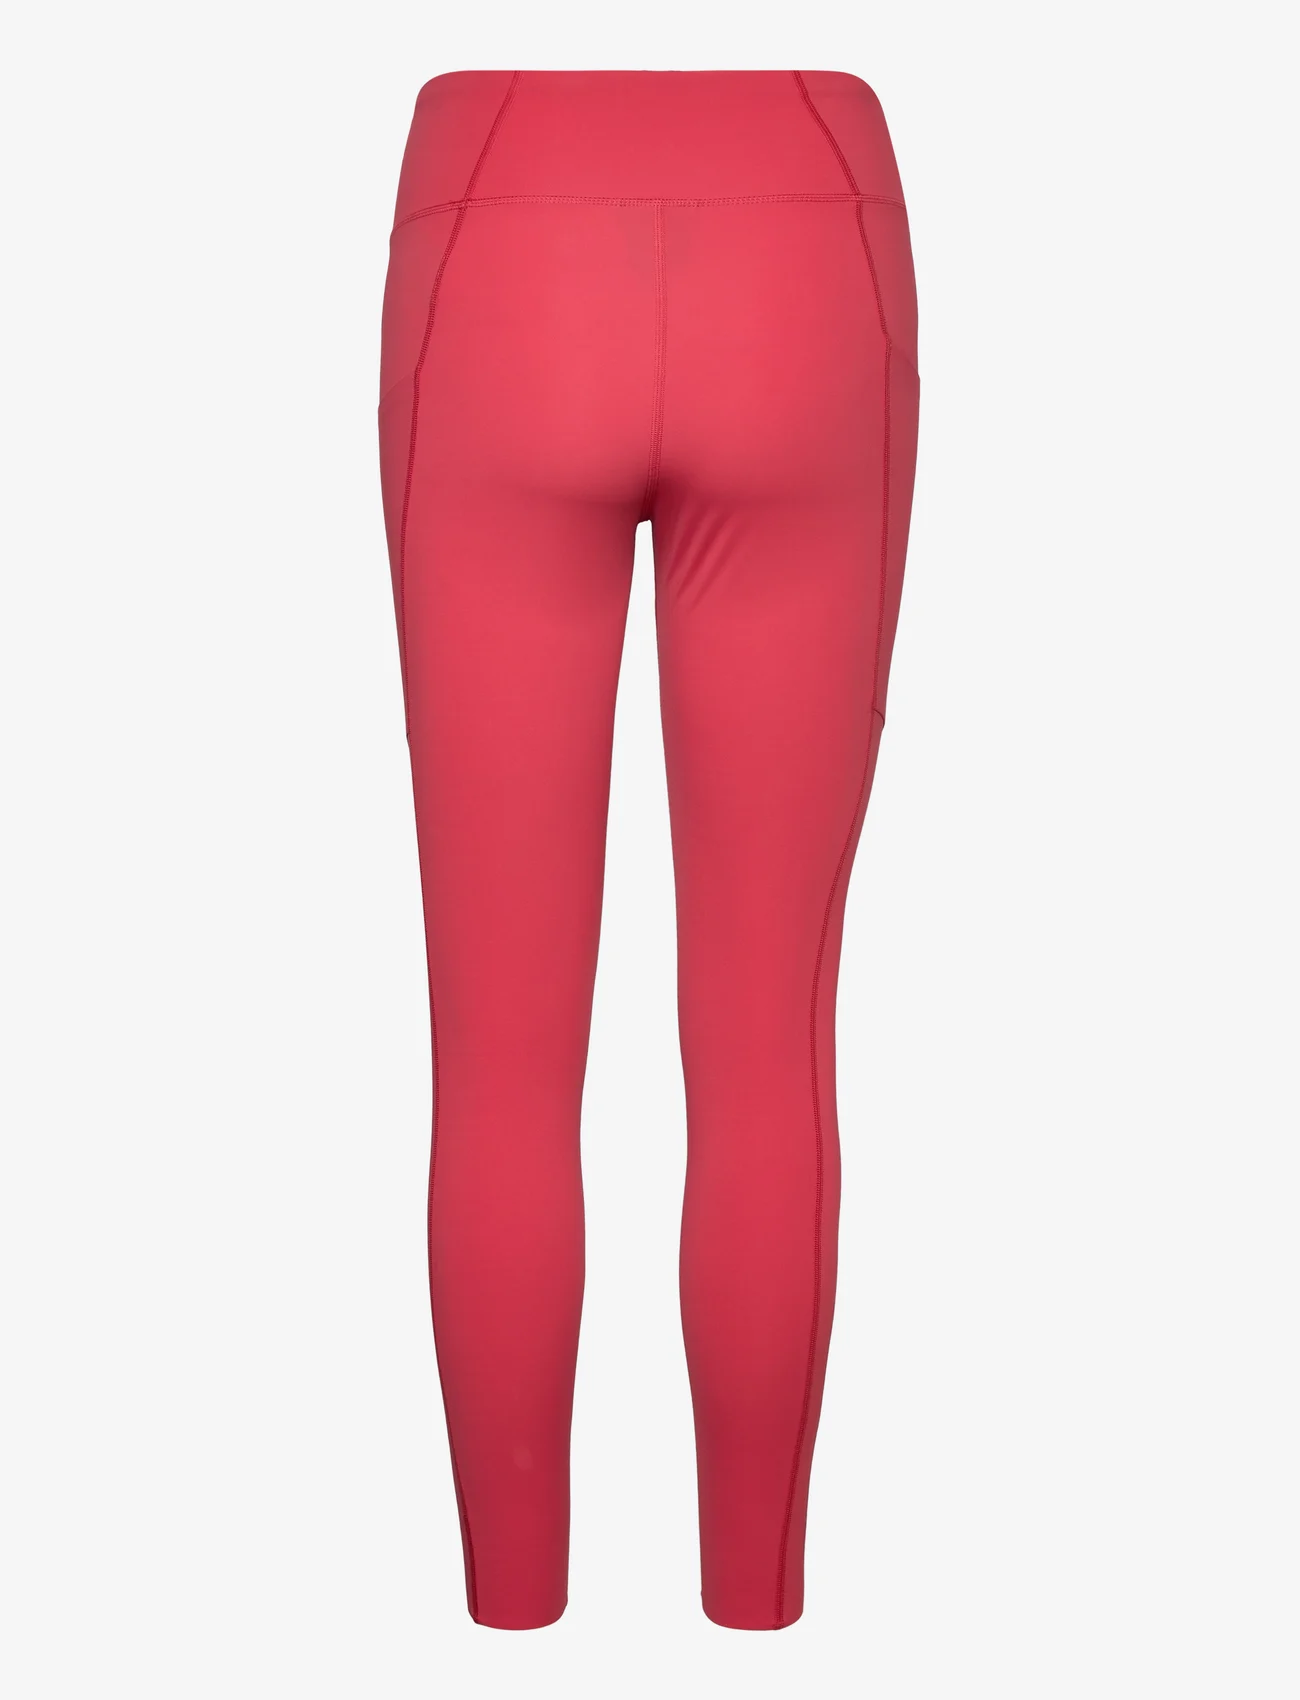 Peak Performance - W Power Tights-SOFTER RED - compression tights - softer red - 1